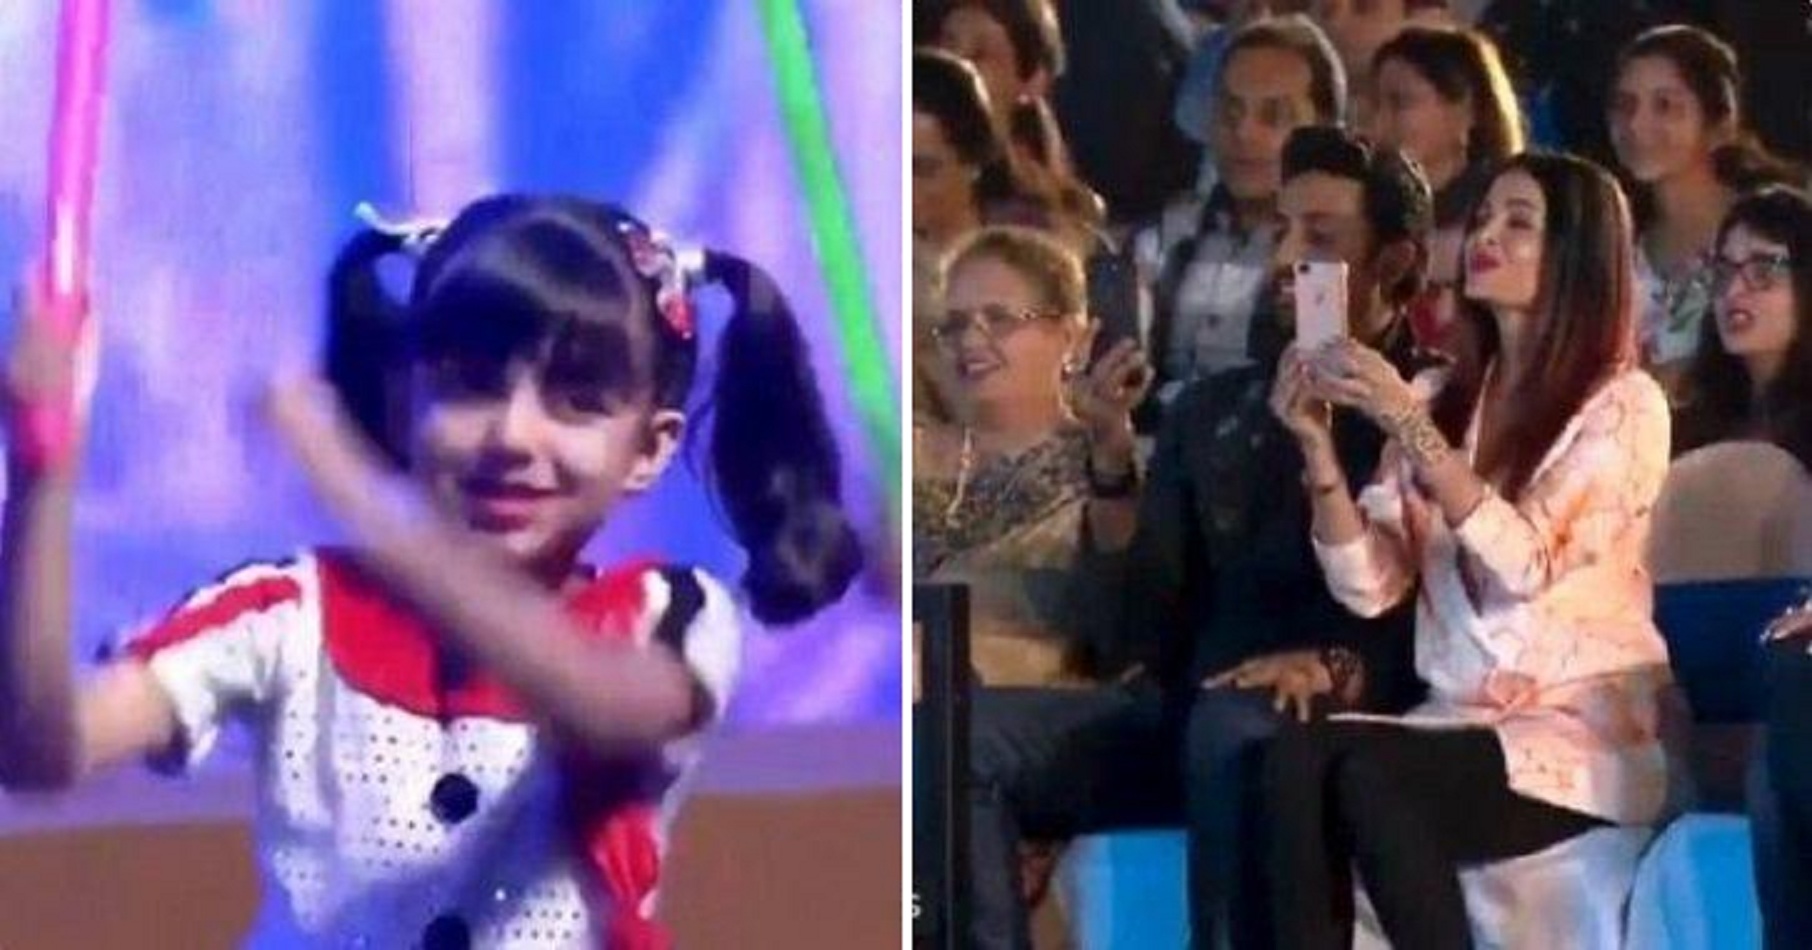 Aaradhya Dances To ‘Shake It Off’ At School, As Mom Aishwarya Cheers From The Audience